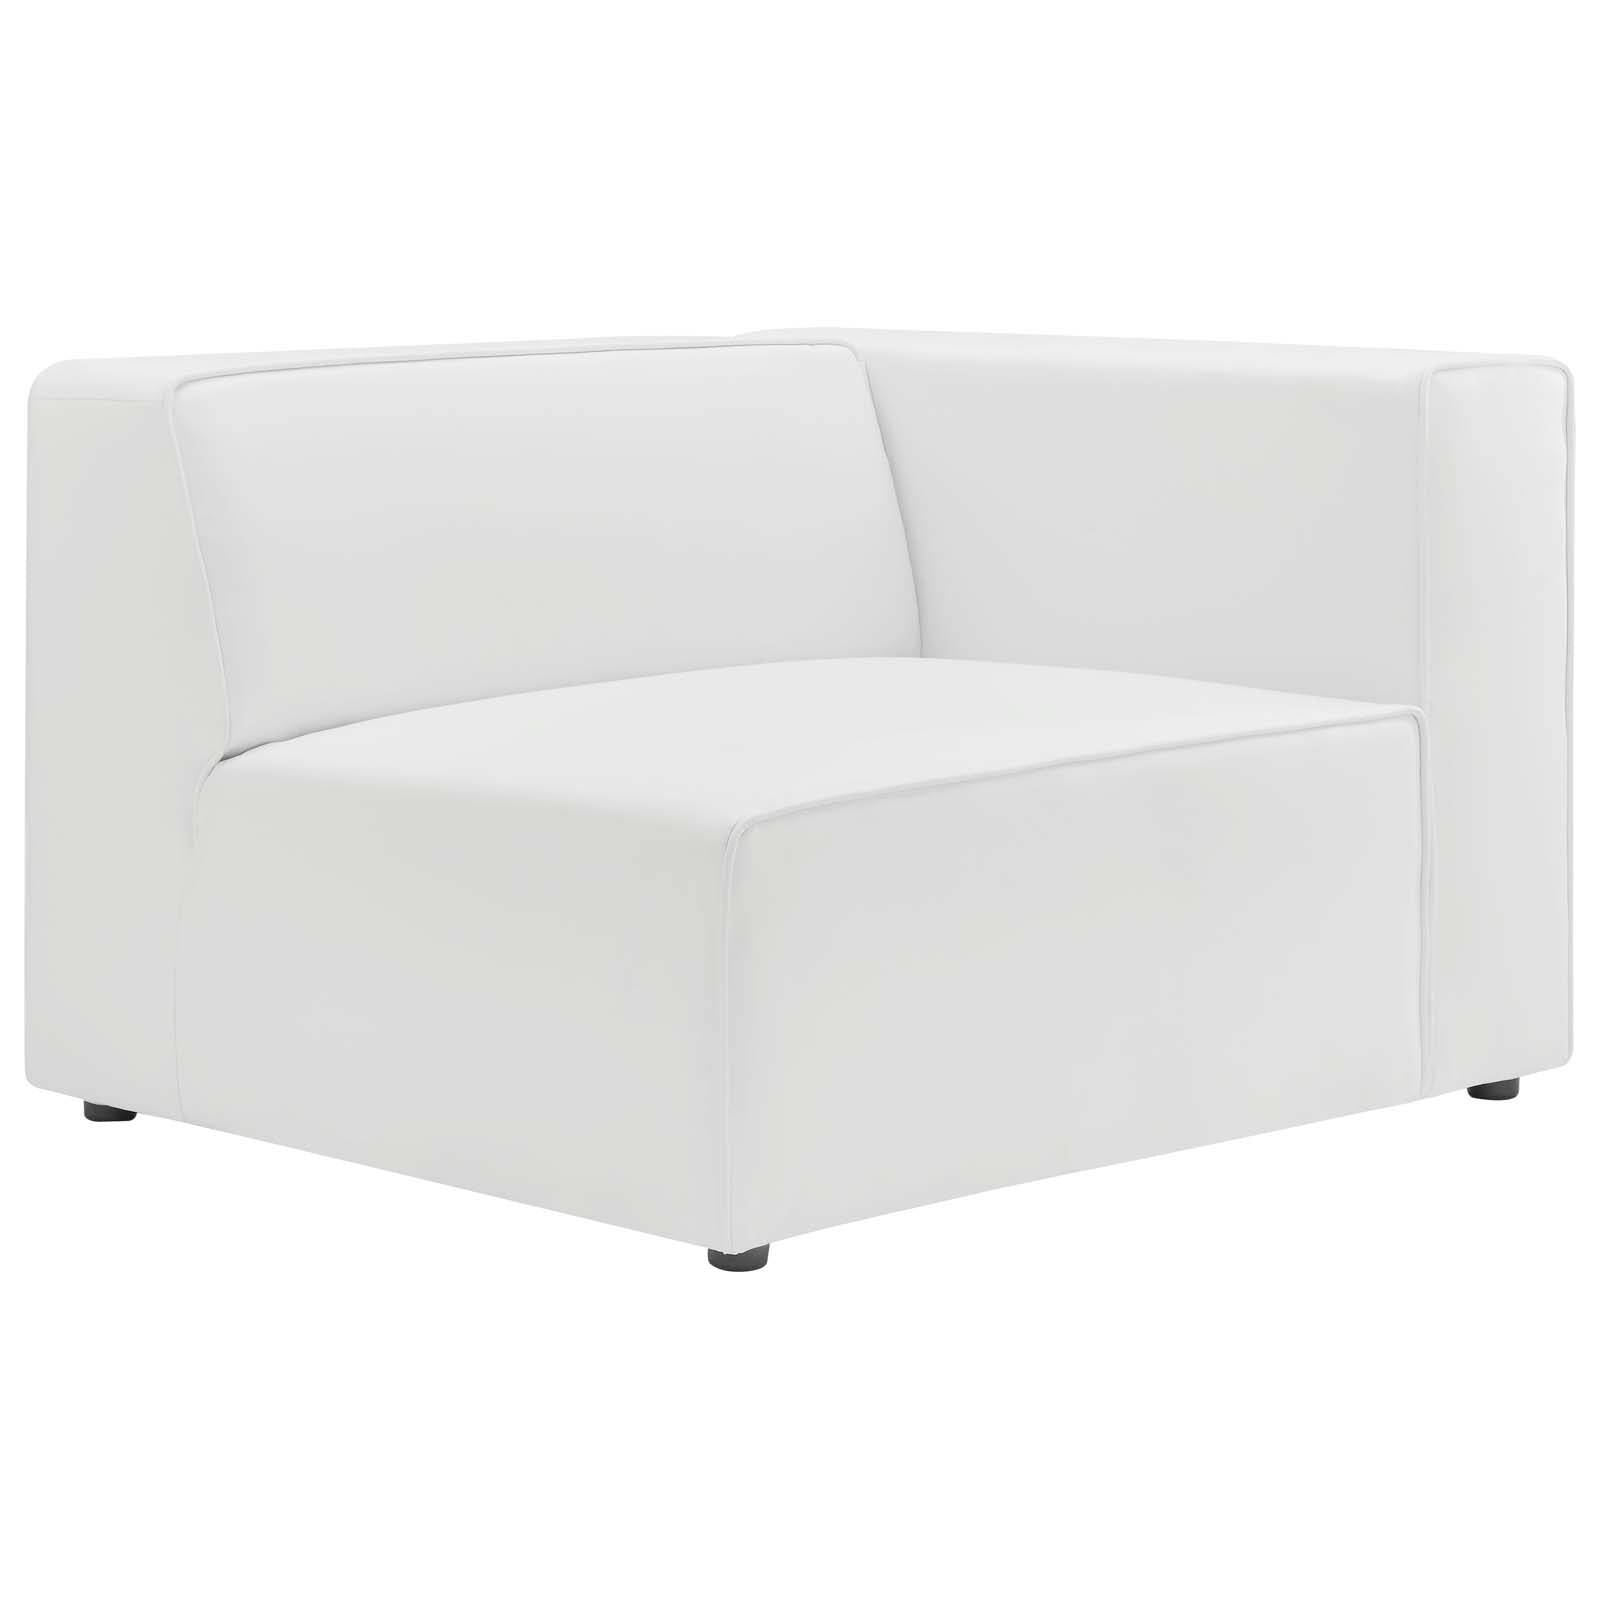 Modway Sectional Sofas - Mingle Vegan Leather 2-Piece Sectional Sofa Loveseat White